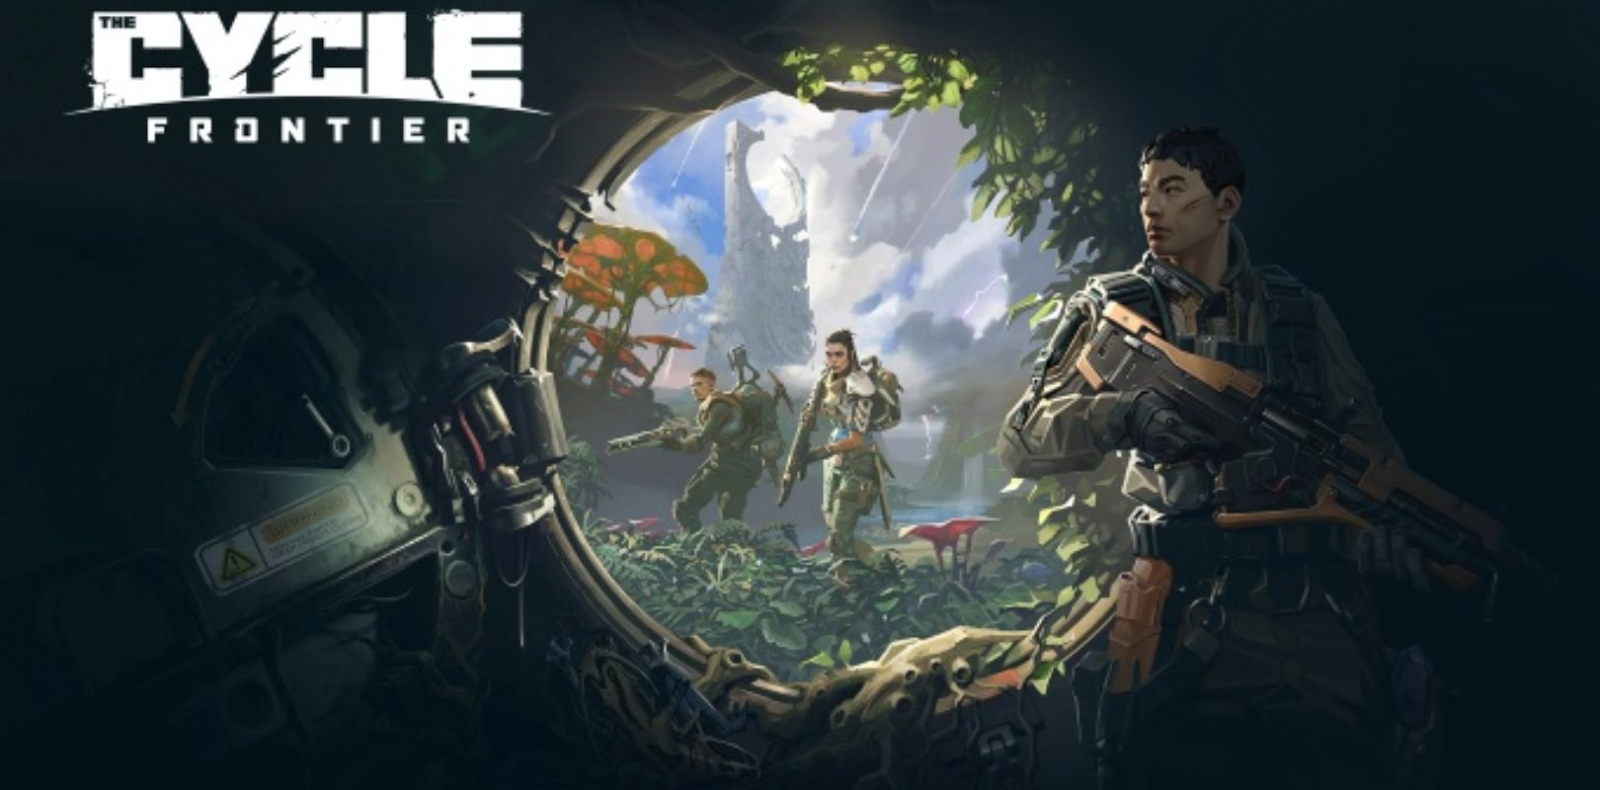 The Cycle: Frontier Survival Guide for Beginners